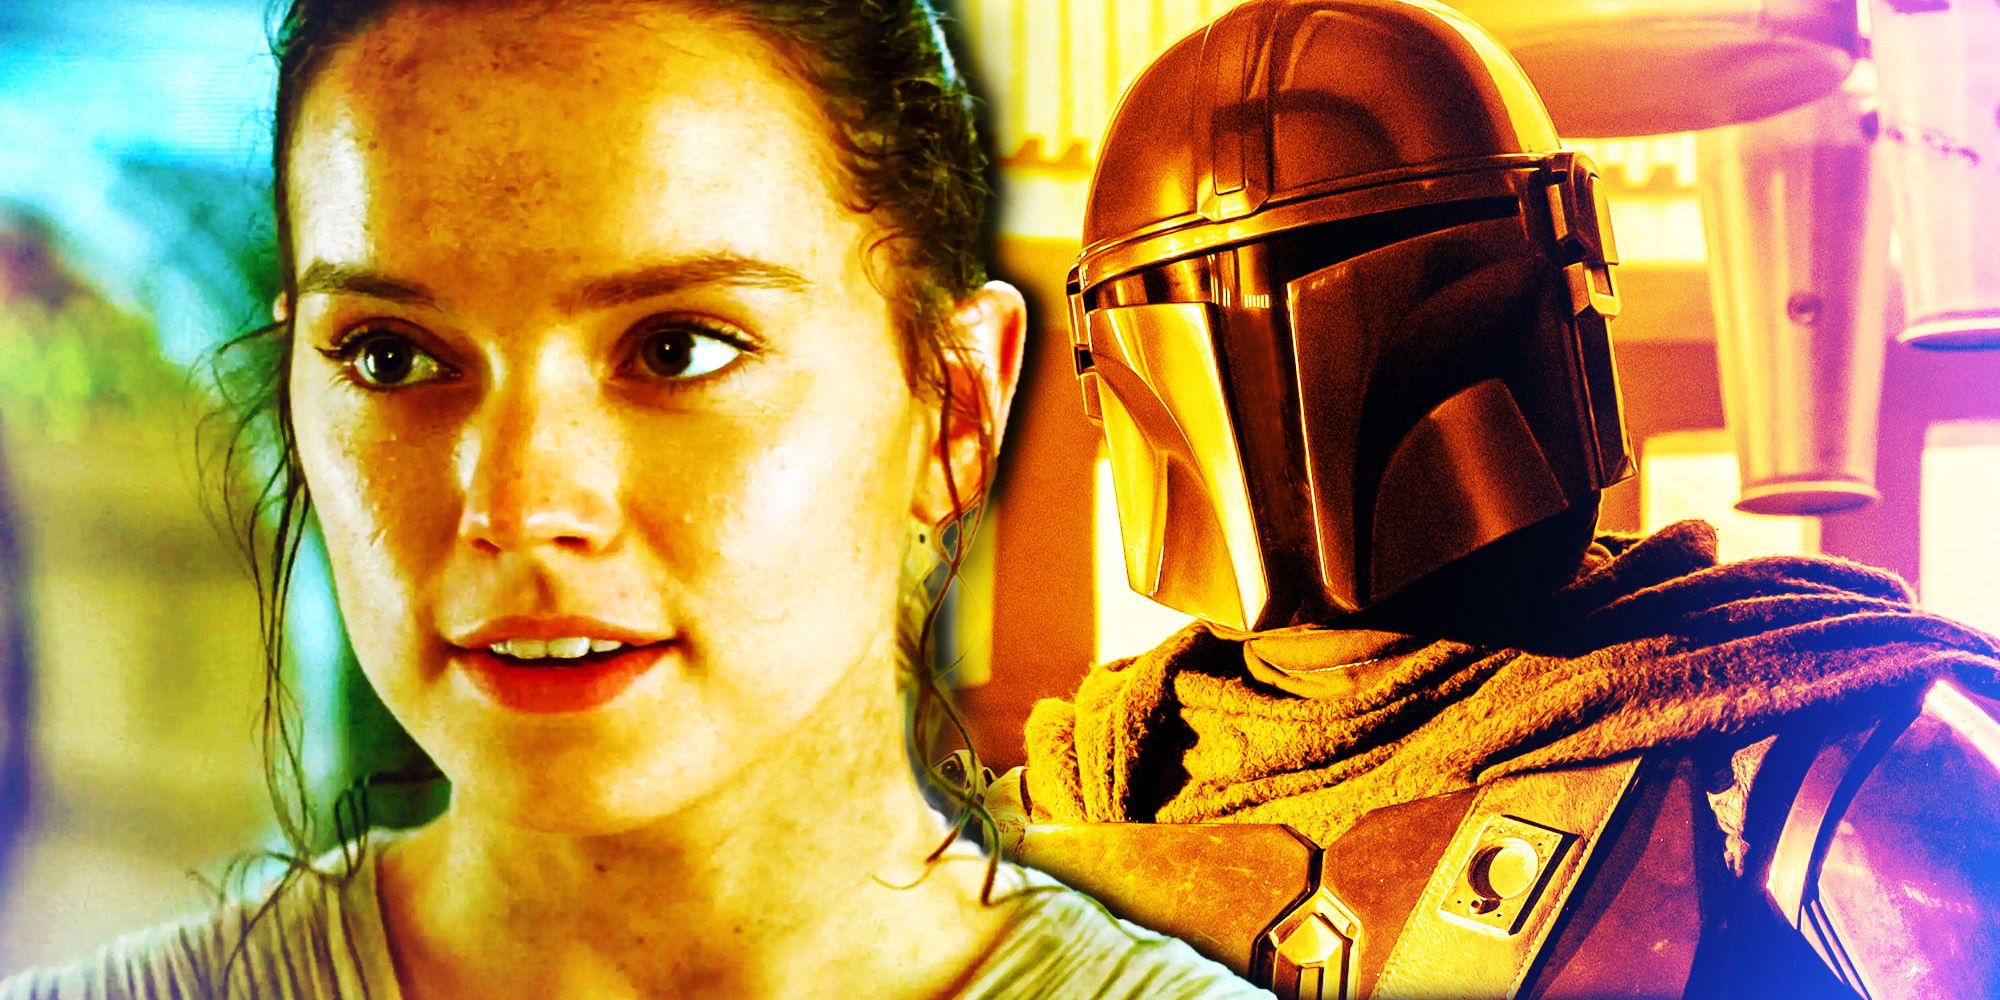 Colorful photos of Rey from The Star Wars sequel trilogy and The Mandalorian wearing helmet side by side